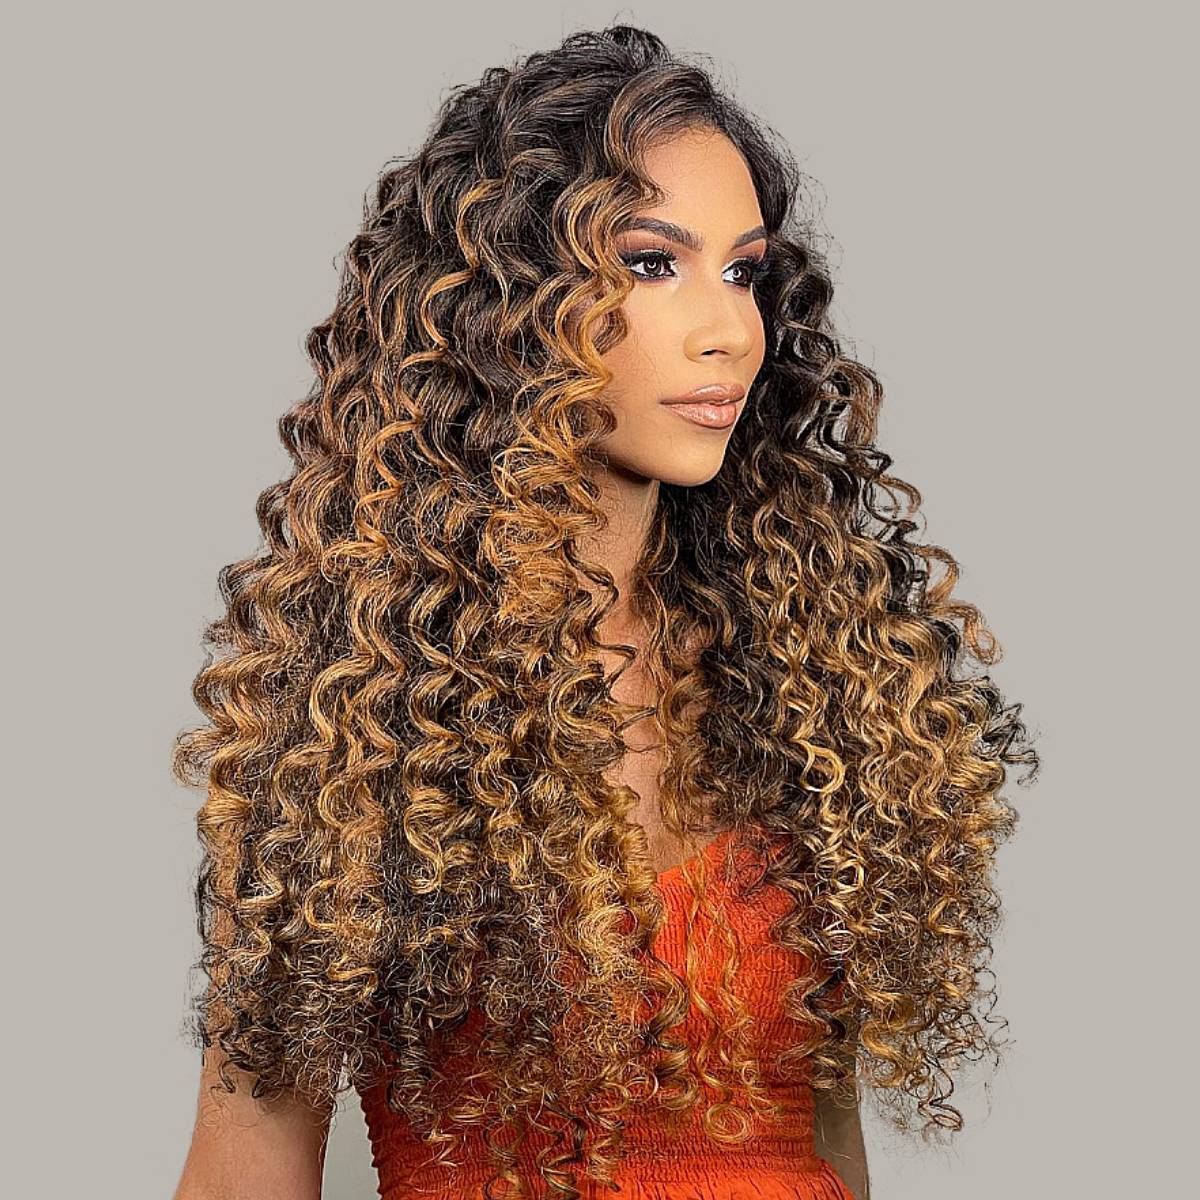 Long Curly Hair For Women 